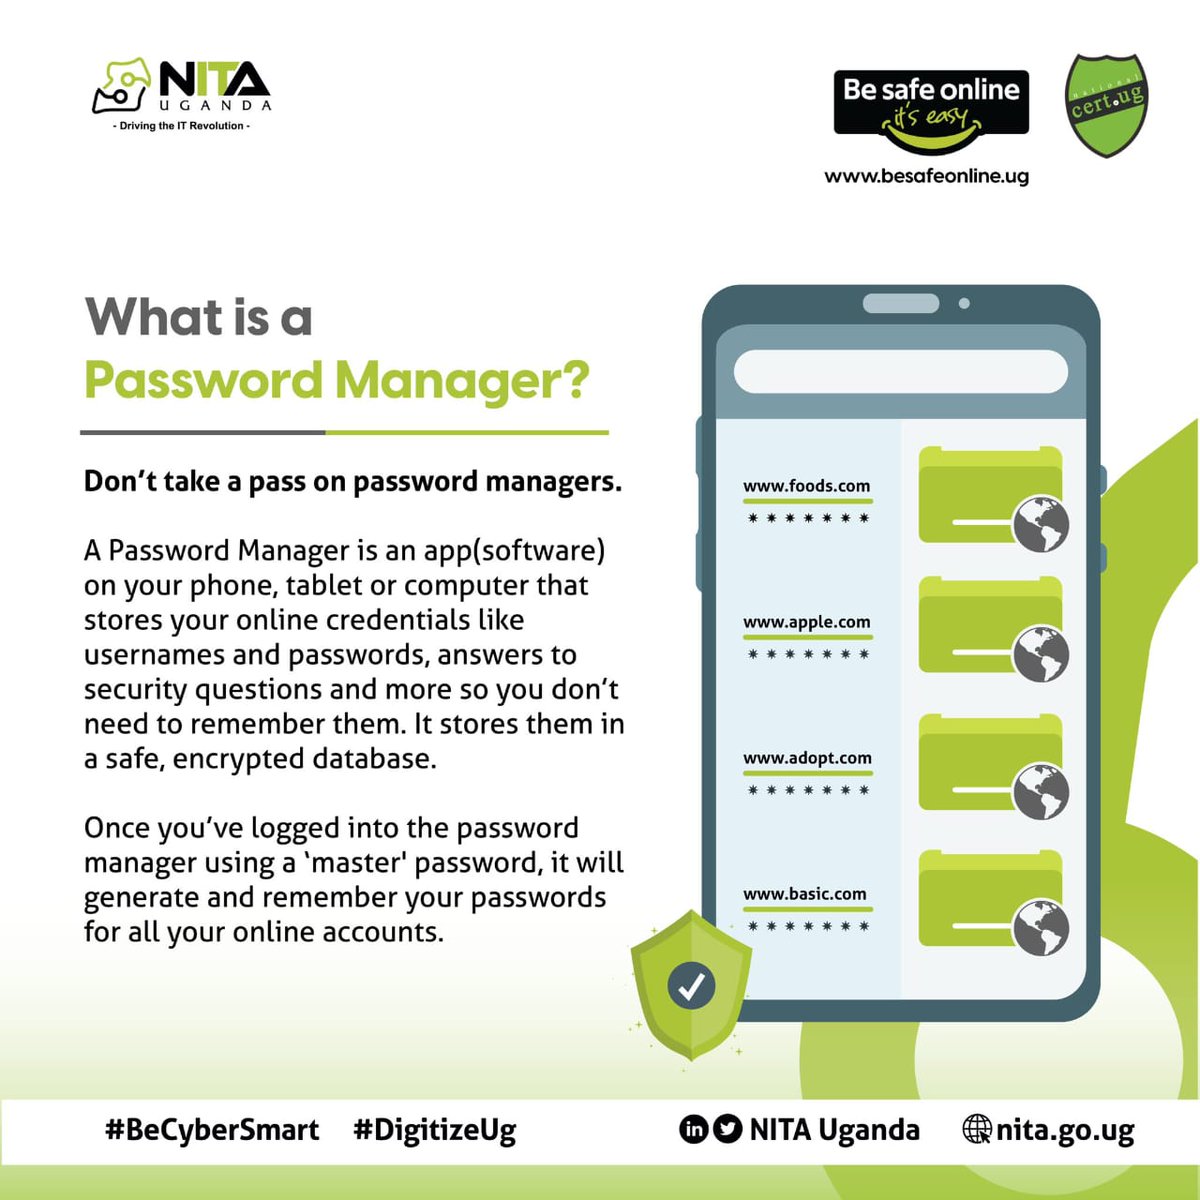 Did you know the average person has over 100 passwords online? Here’s an easy pro tip: a Password Manager can do all the managing of strong, unique passwords for each account. #CybersecurityAwarenessMonth #BeCyberSmart #DigitizeUG